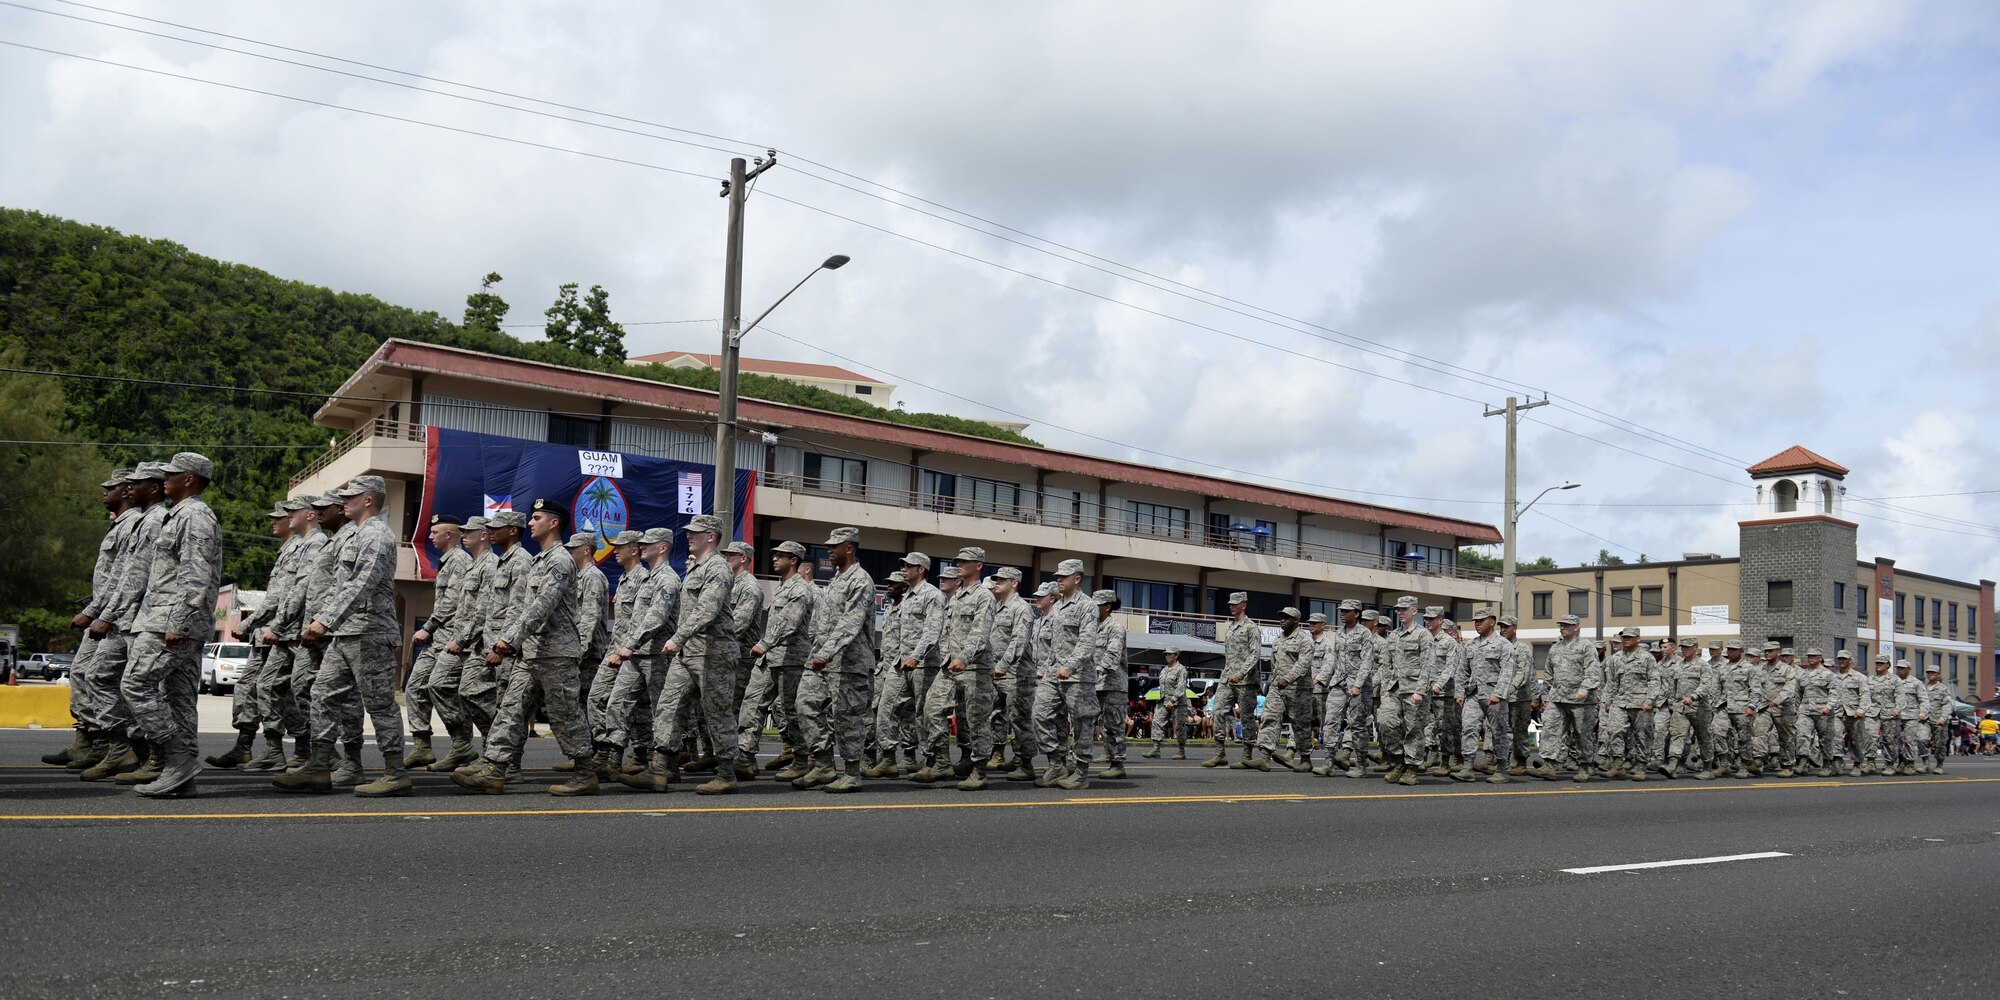 U.S. Airmen from the 36th Wing march in the 73rd Guam Liberation Day parade July 21, 2017, in Hagåtña, Guam. Liberation Day is celebrated to honor the U.S. armed forces who liberated the island from Japanese control in 1944. (U.S. Air Force photo by Airman 1st Class Gerald R. Willis)